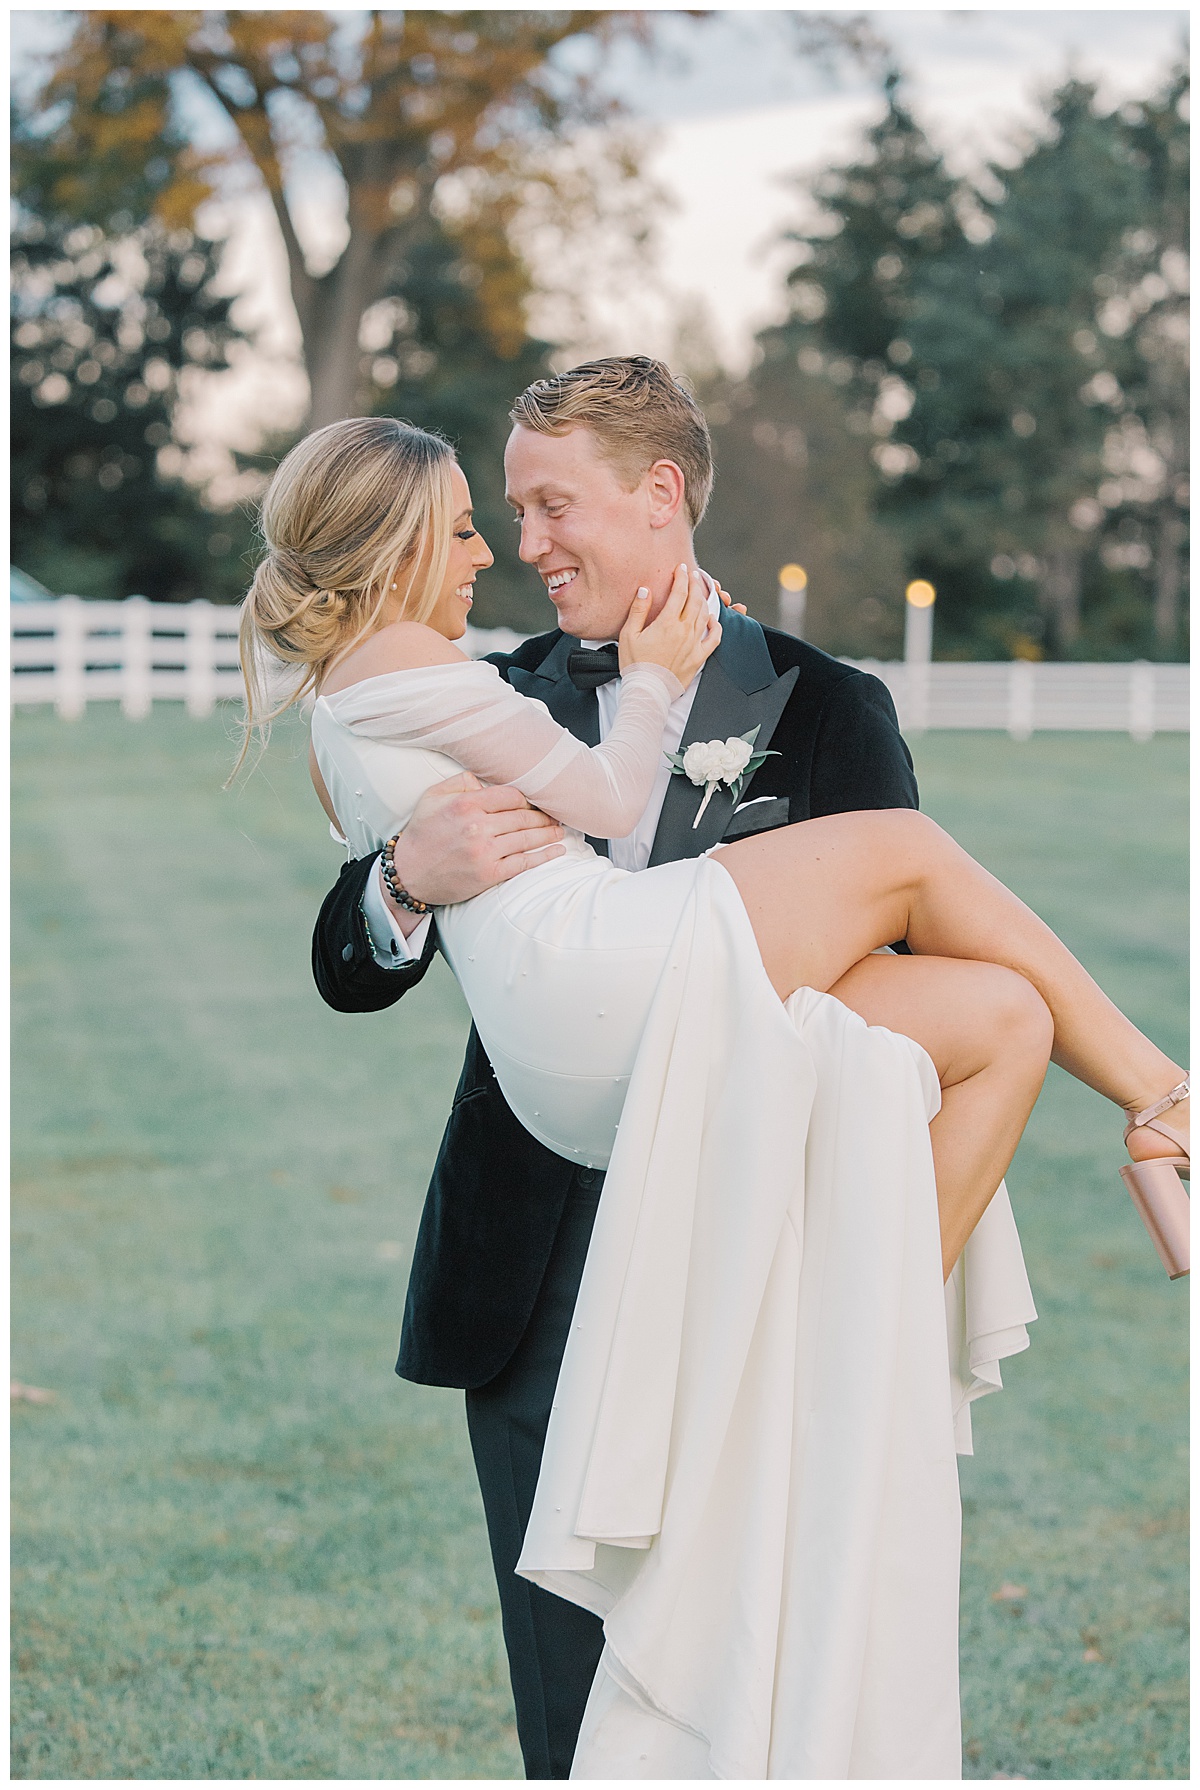 Groom scoops up bride and snuggles her tight in field.